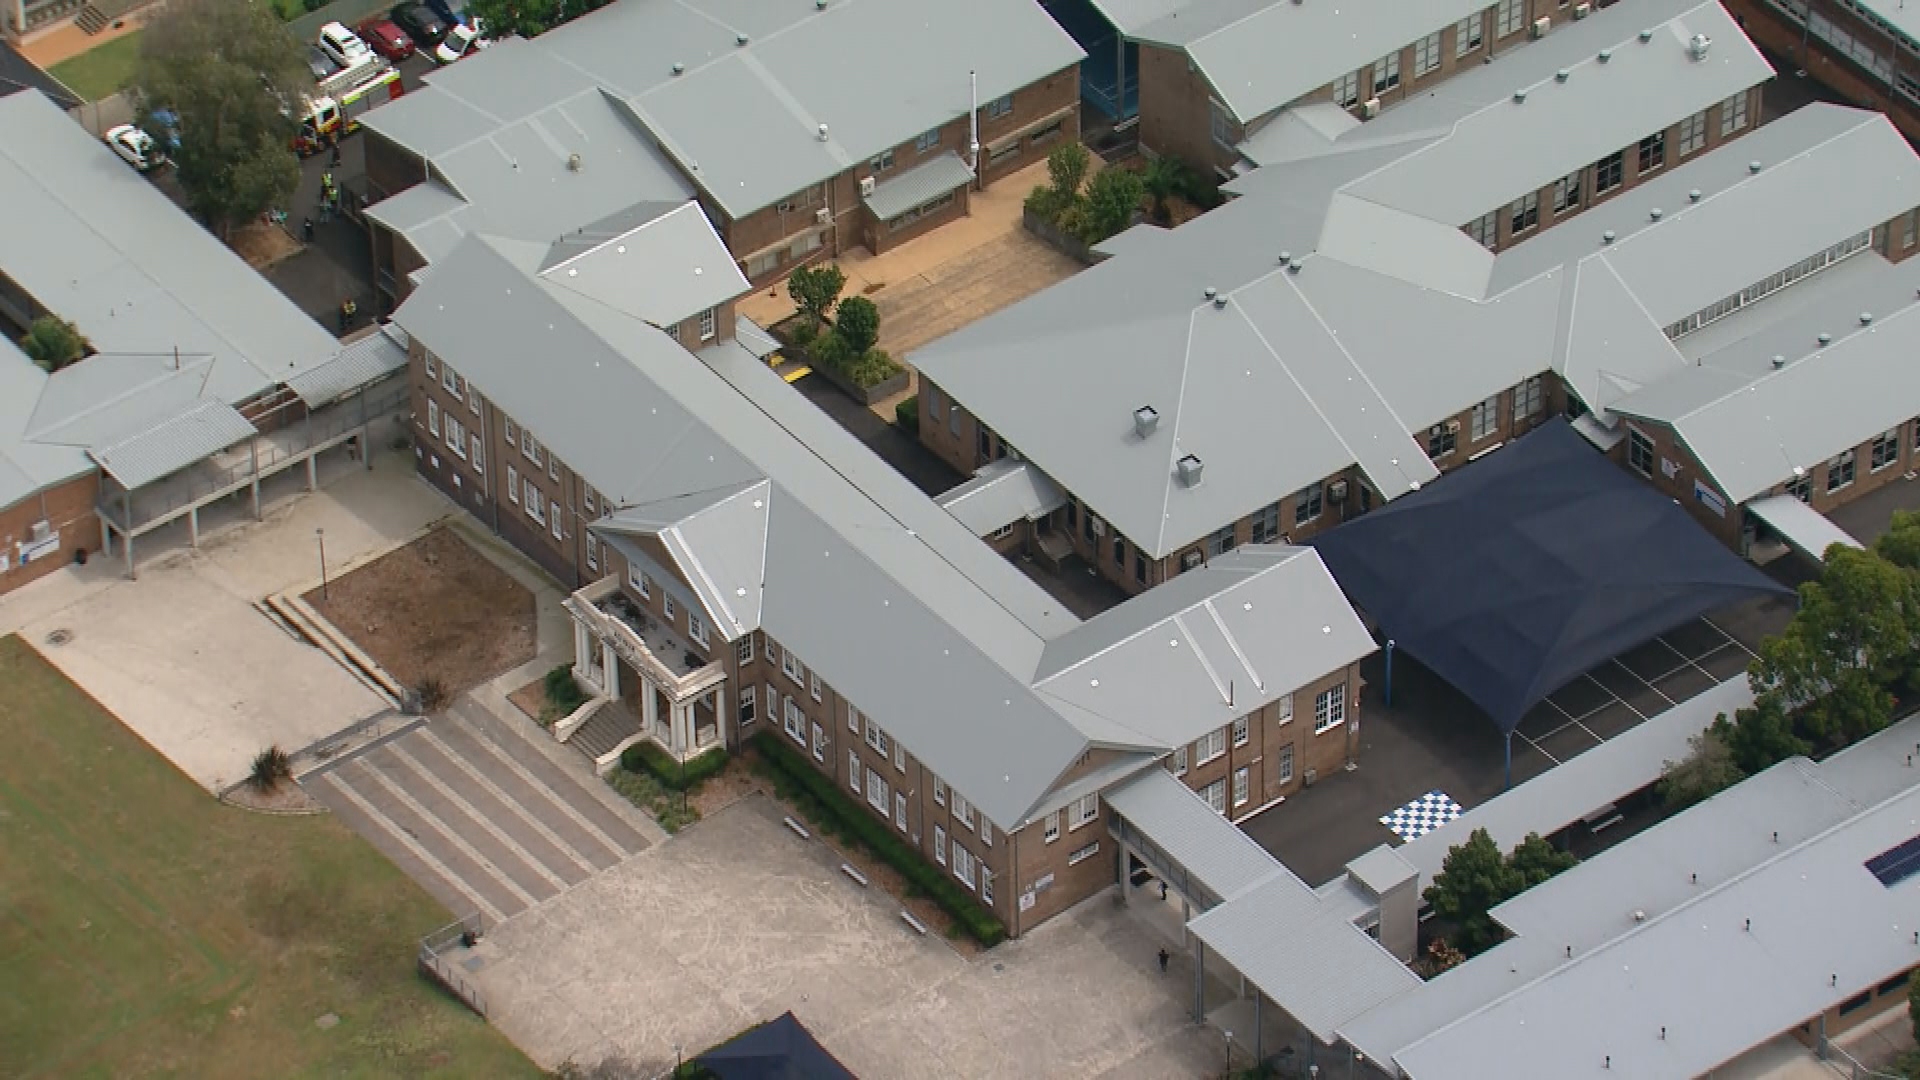 almost 30 students, teachers left feeling 'unwell' after chemical spill at school